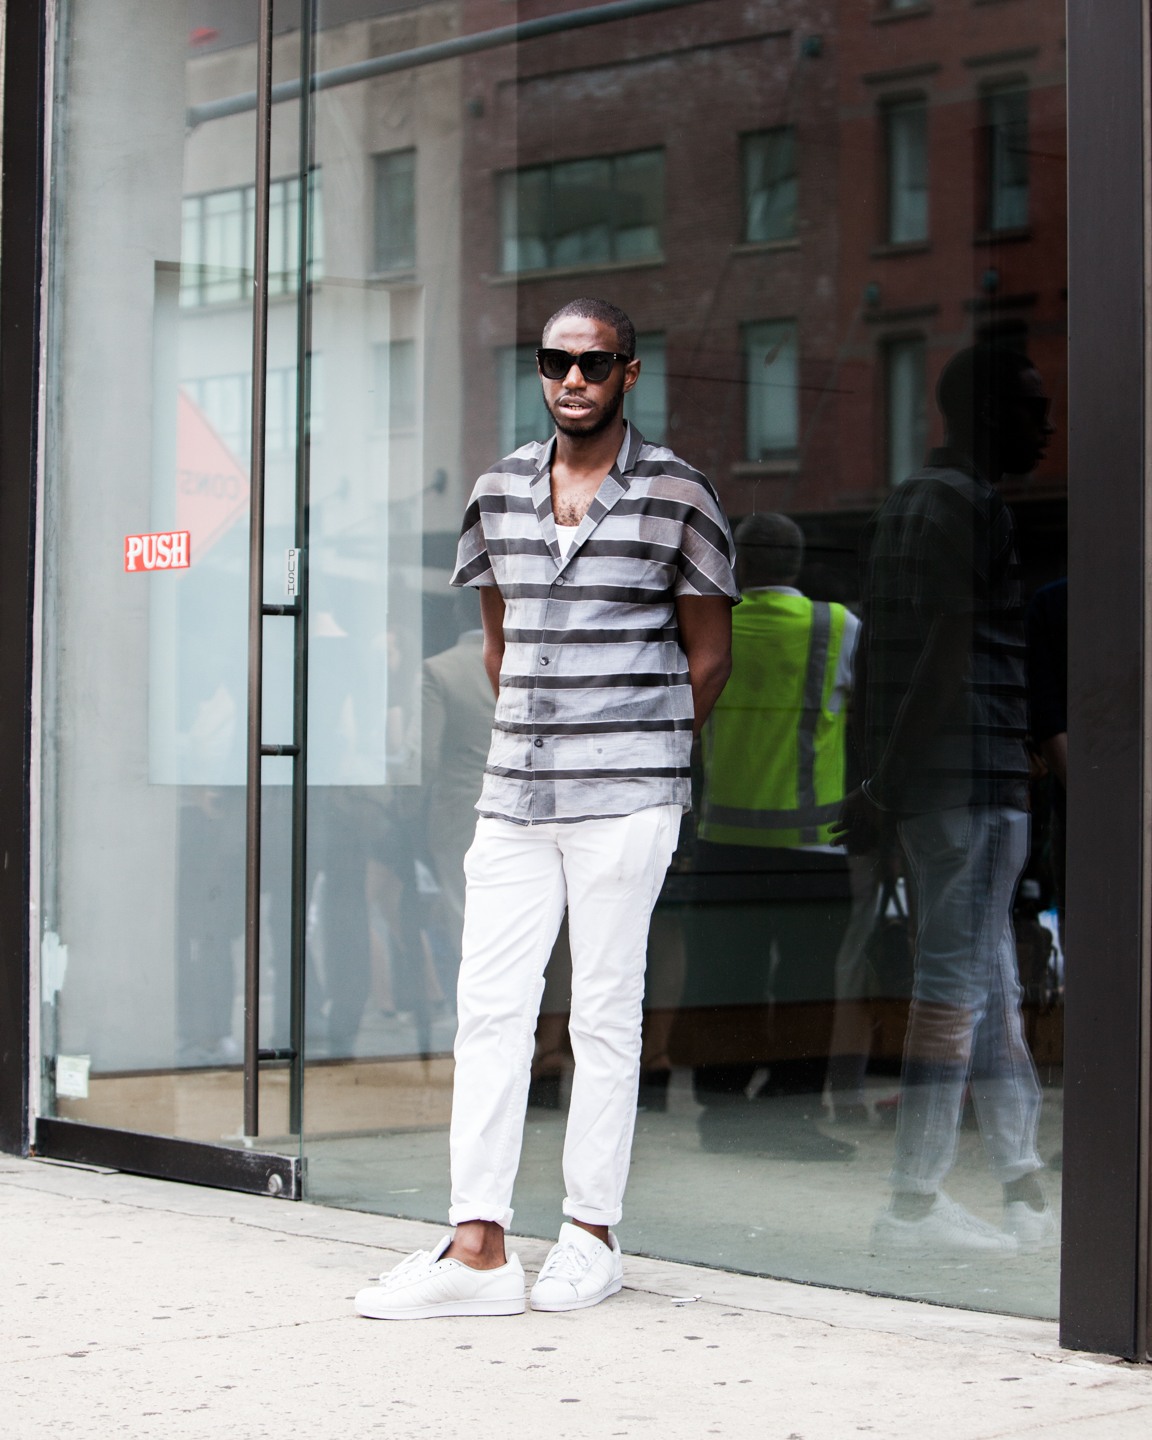 The 27 Strongest Street Style Looks From Men’s Fashion Week